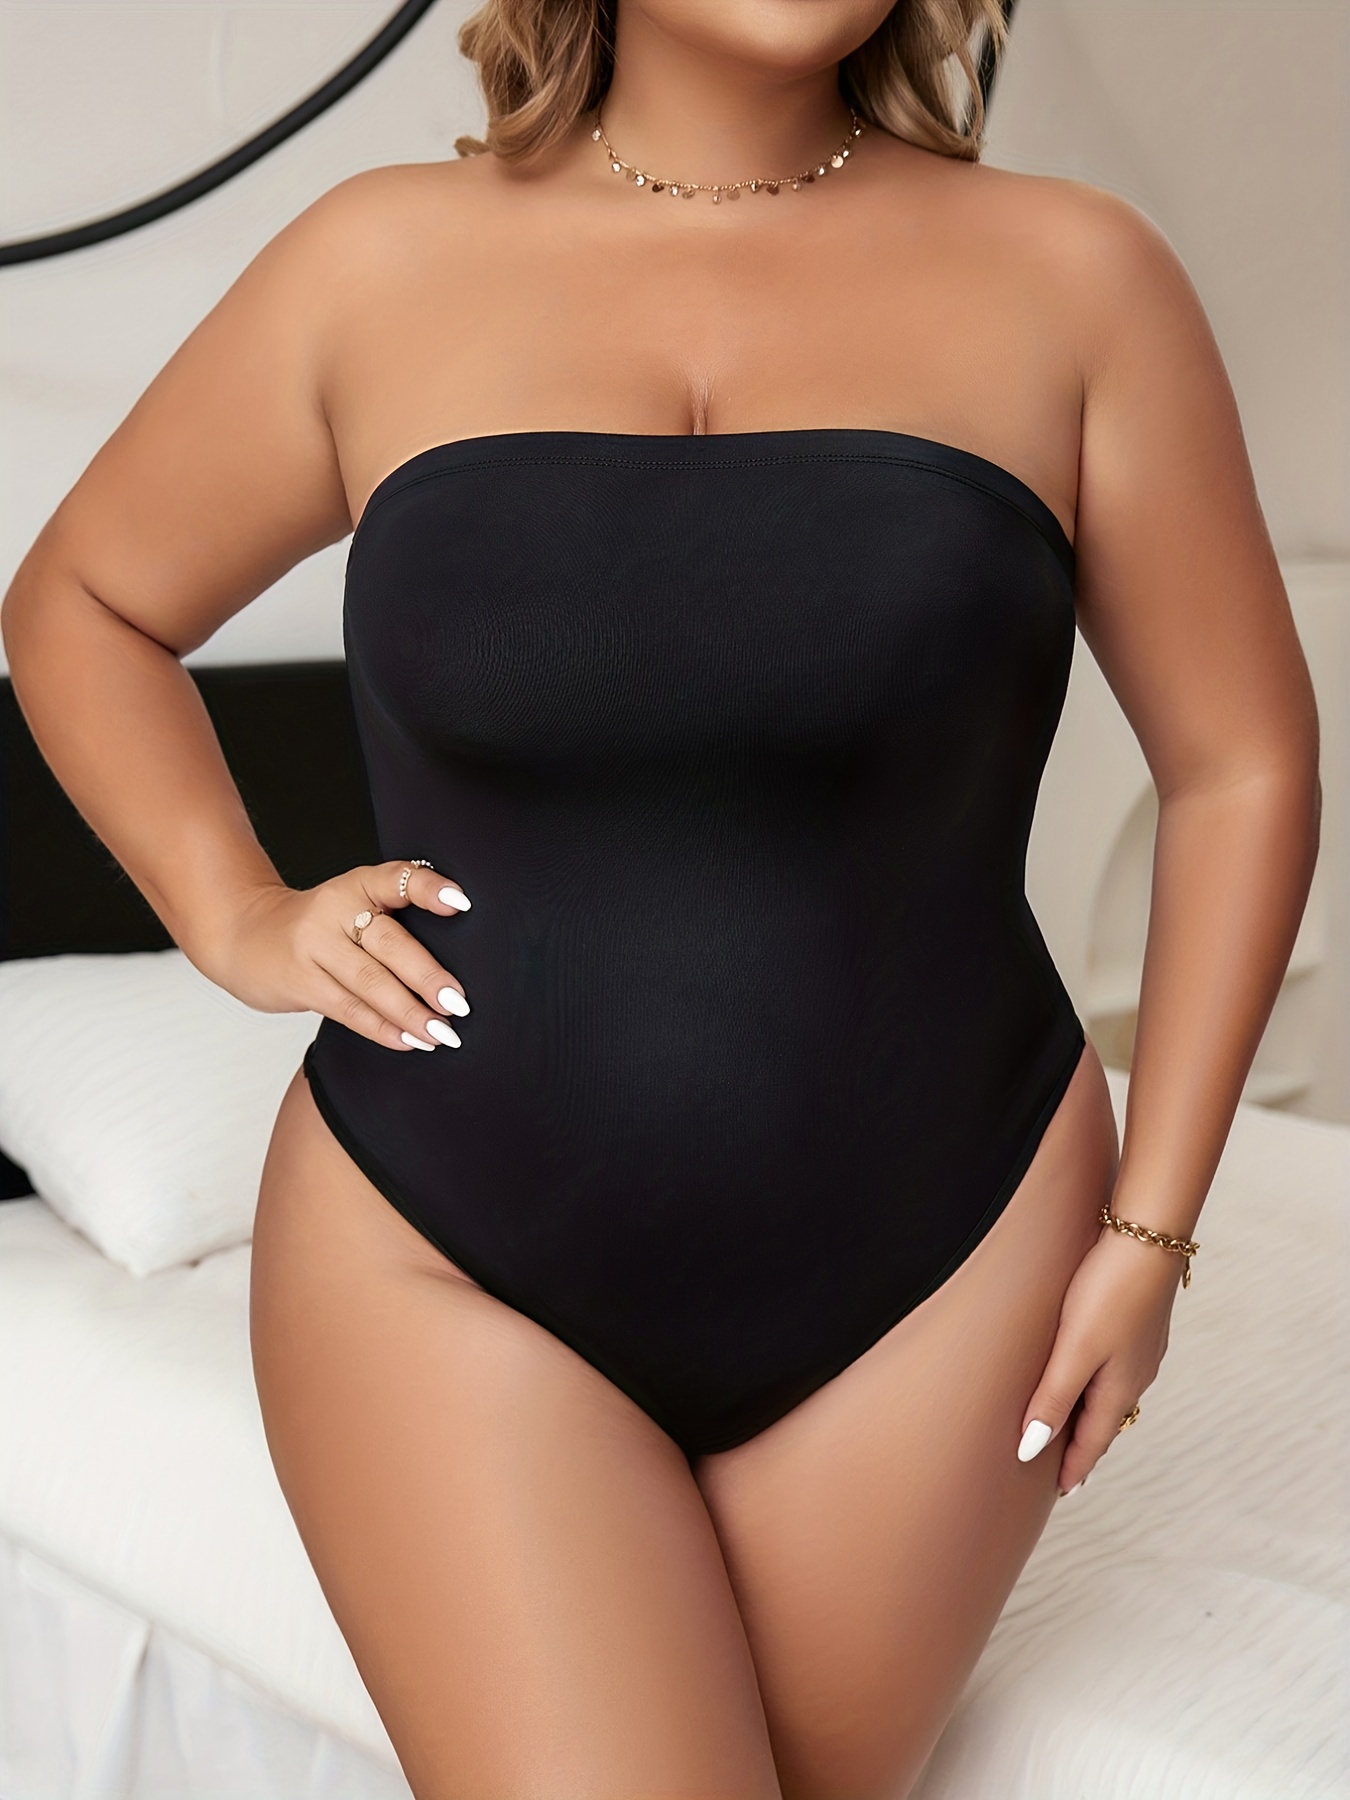 GETOUT Best Shapewear For Fupa Plus Size Strapless Shapewear With